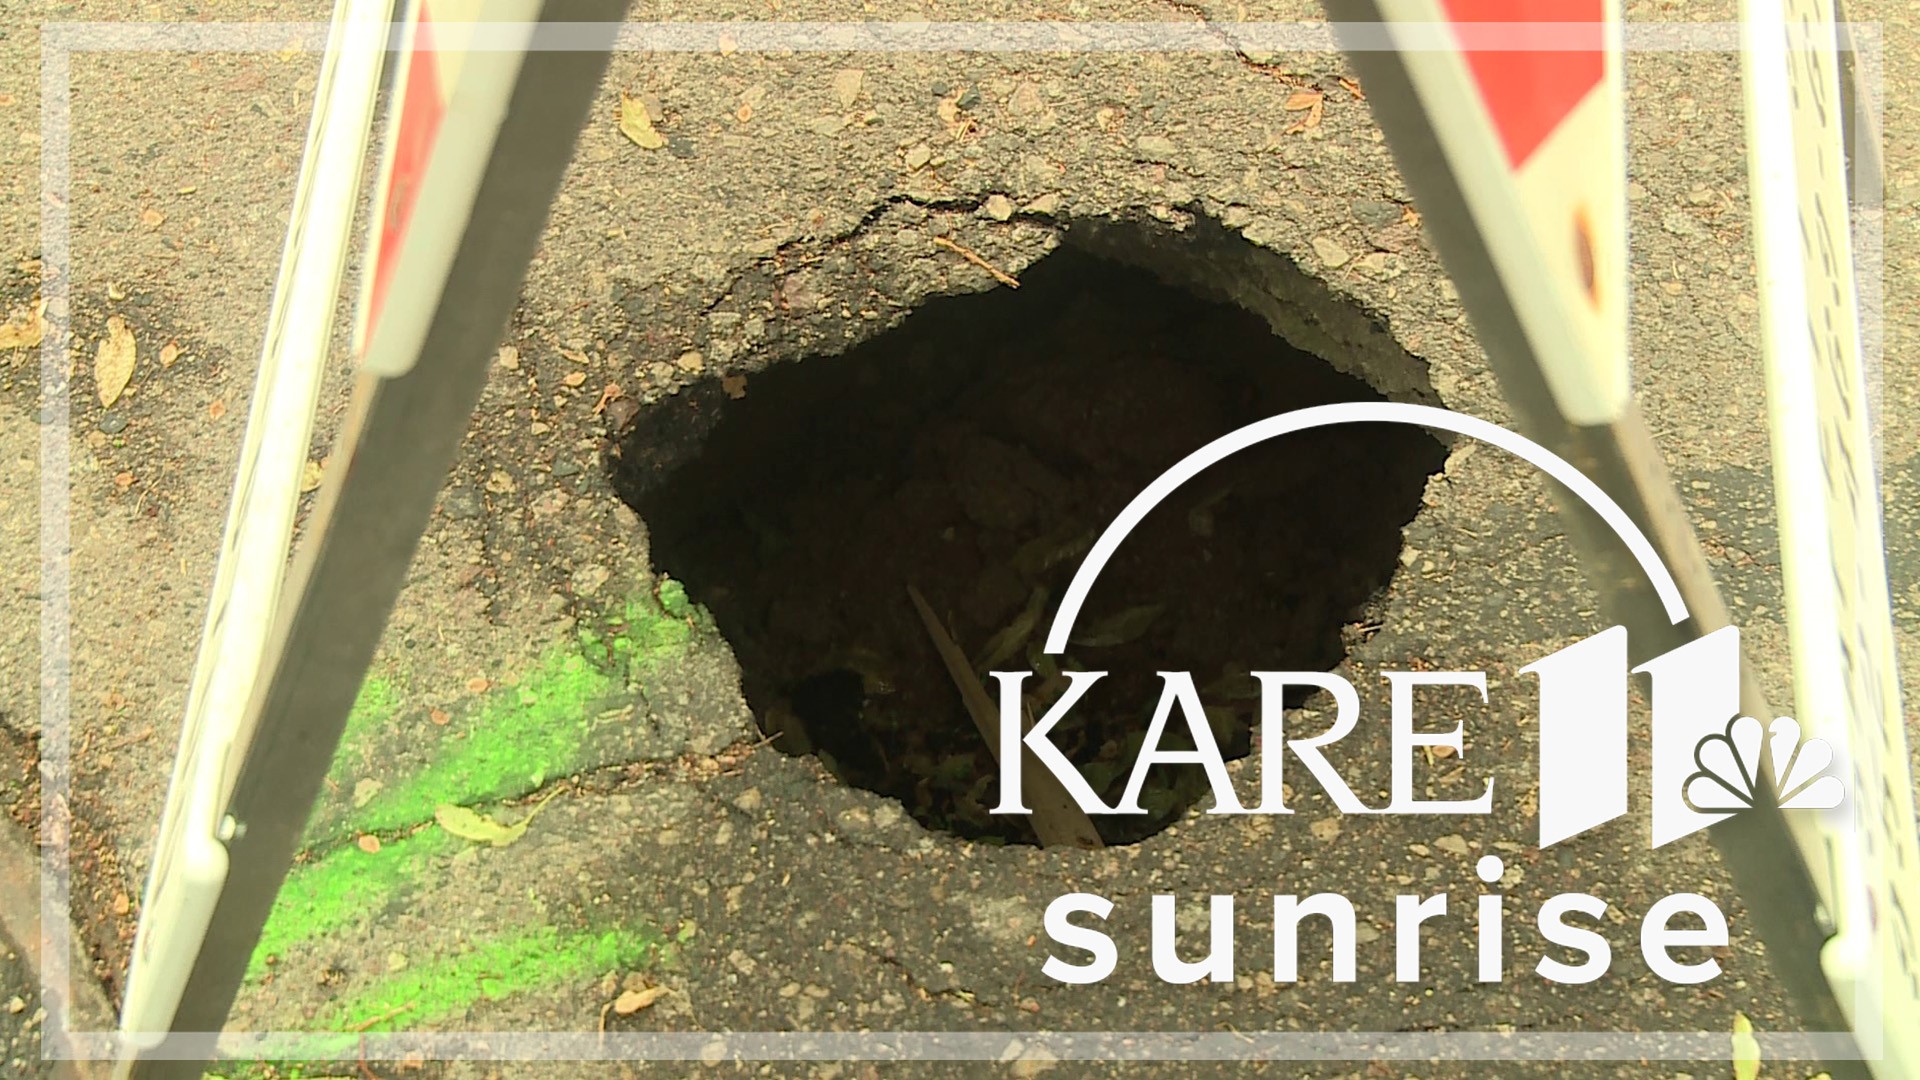 A city spokesperson told KARE 11 that this particular sinkhole was caused by a storm drain system that collapsed, and crews were expected to begin repairs Wednesday.